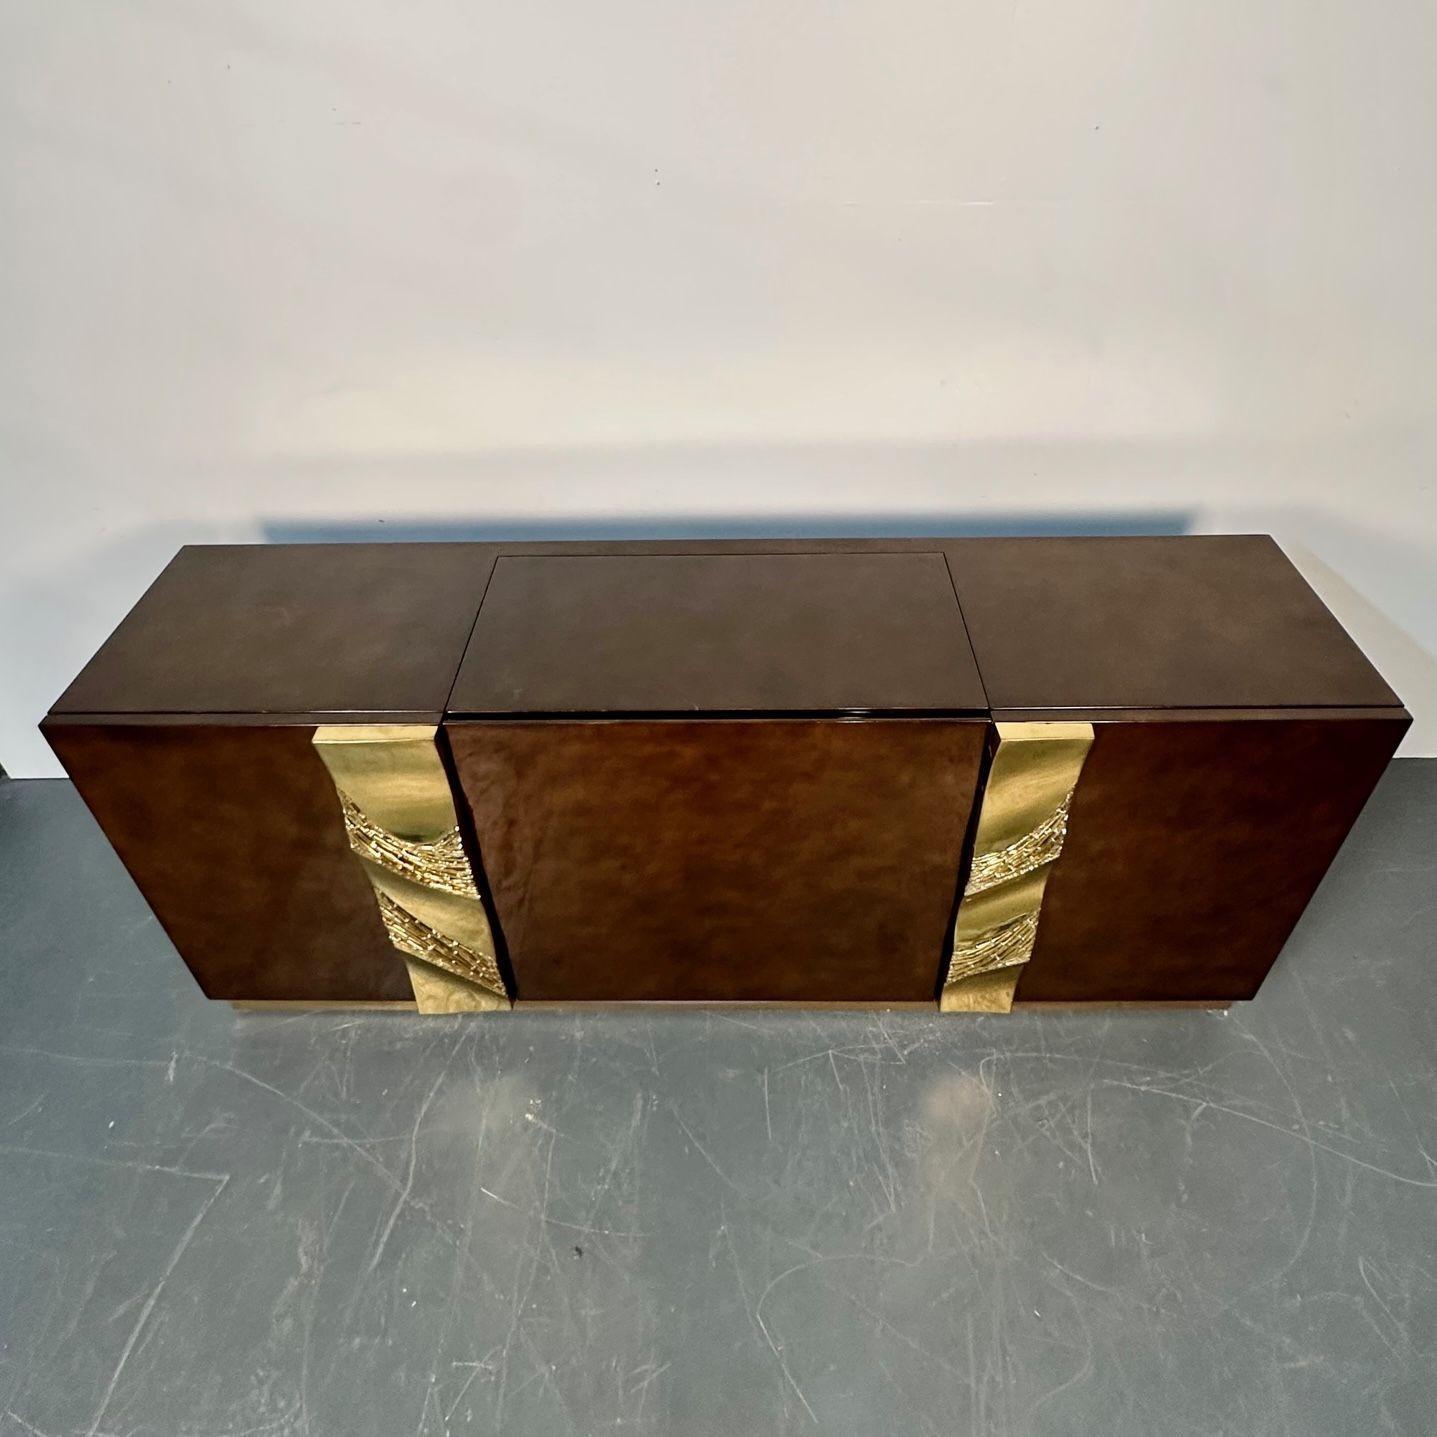 Italian Mid-Century Modern Bar / Entertainment Cabinet, Aldo Tura Style, Lacquer In Good Condition For Sale In Stamford, CT